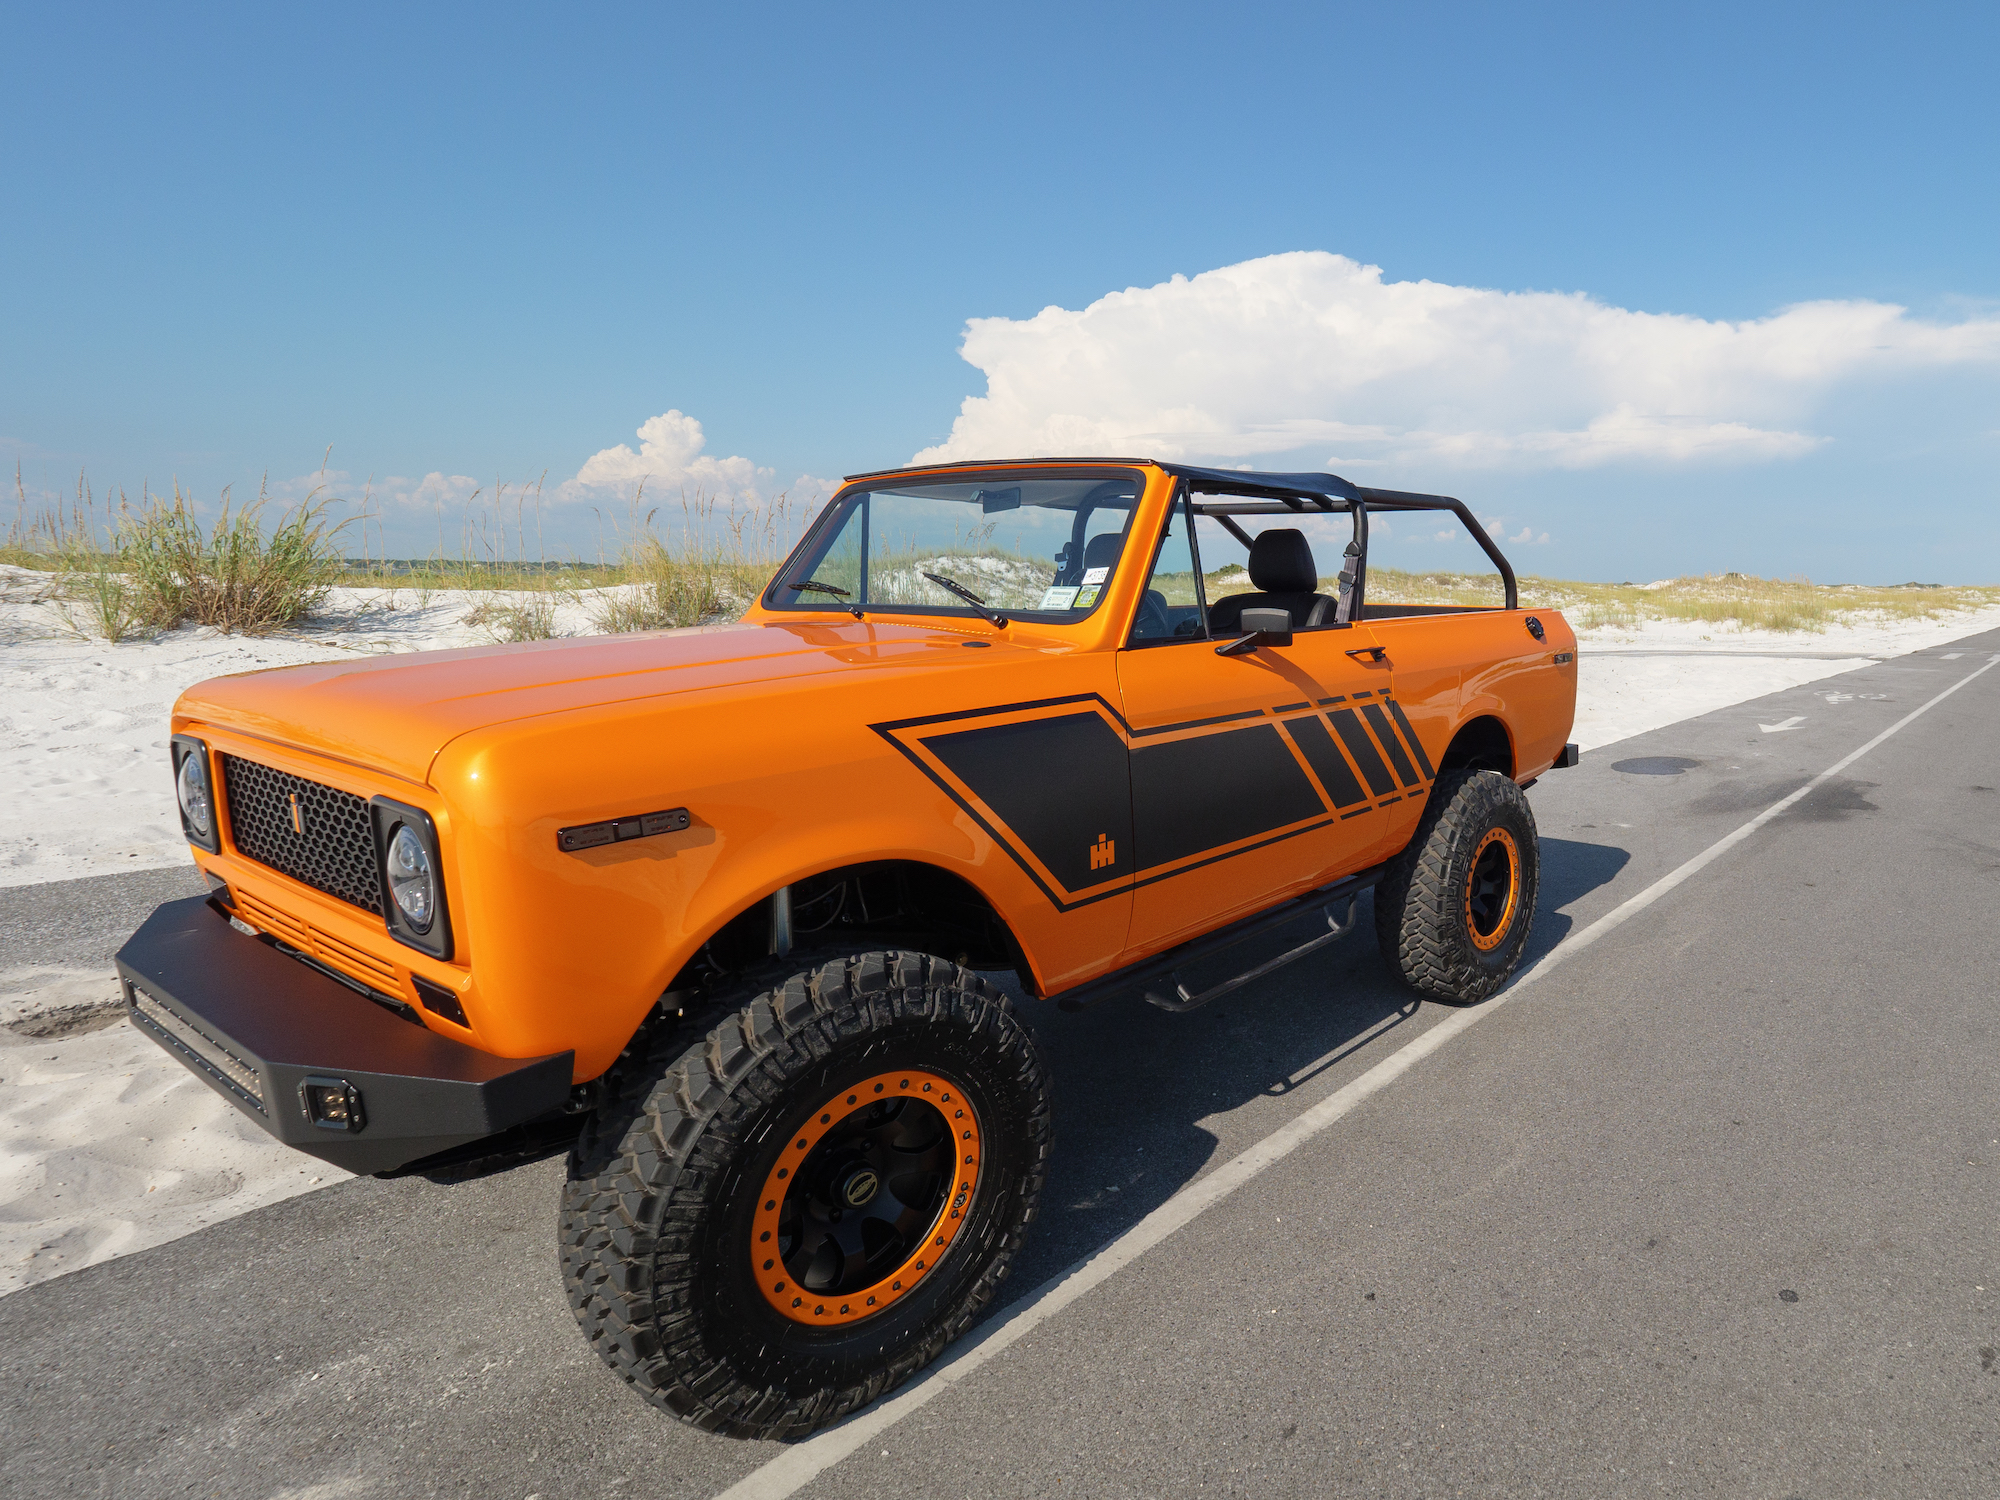 An orange 1979 International Harvester Scout SUV-like vehicle parked on the shoulder of a road next to a sand dune